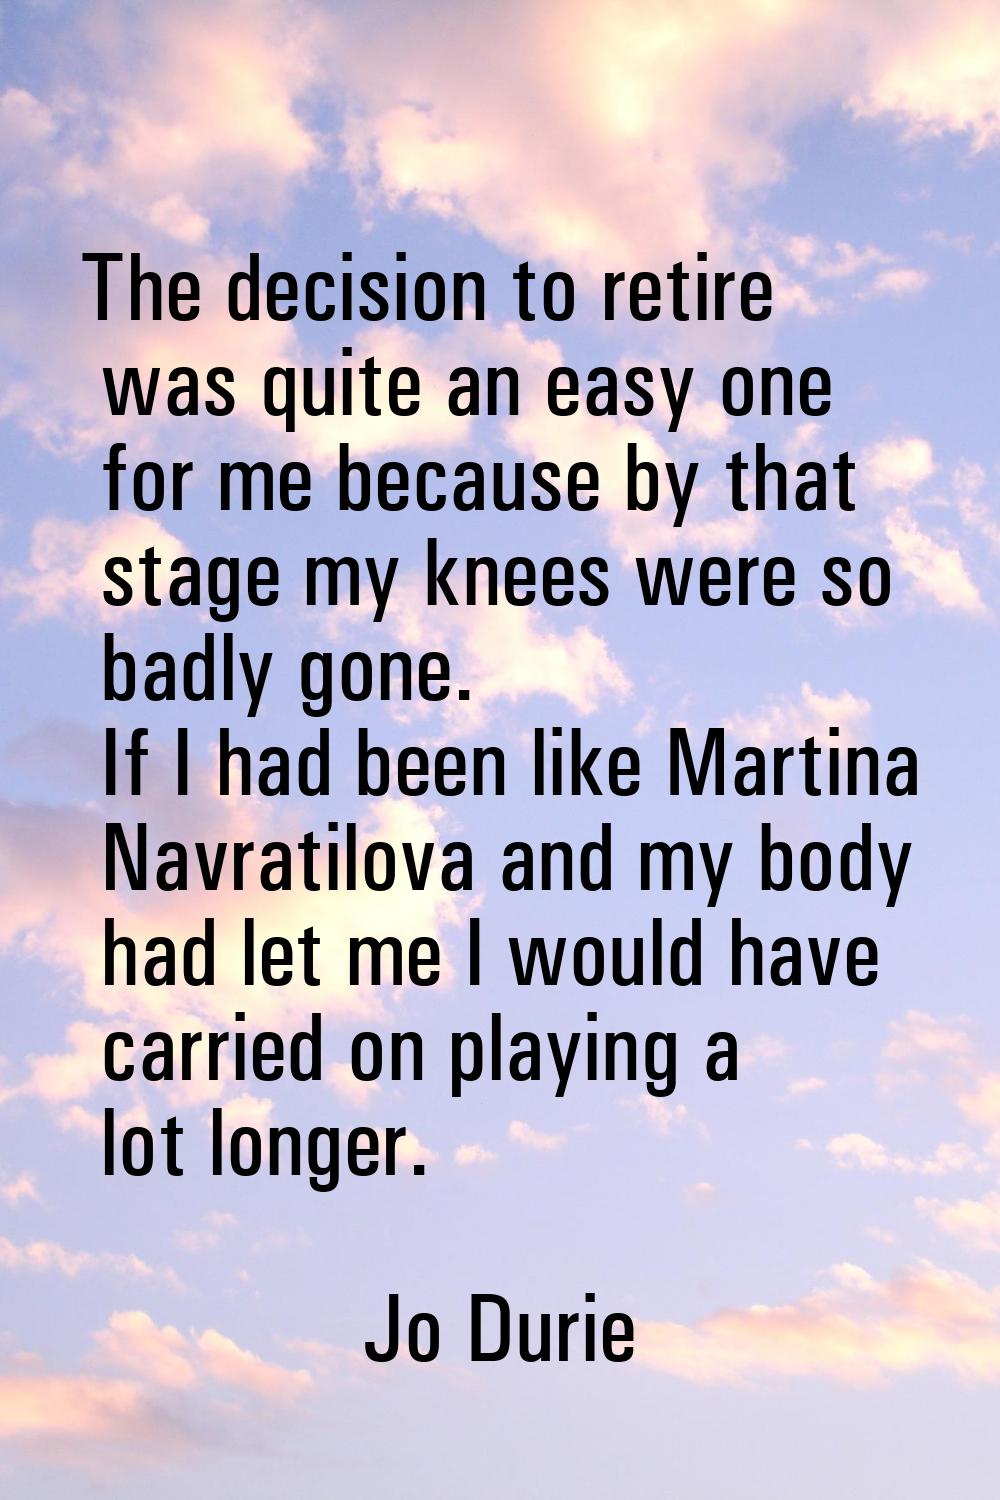 The decision to retire was quite an easy one for me because by that stage my knees were so badly go